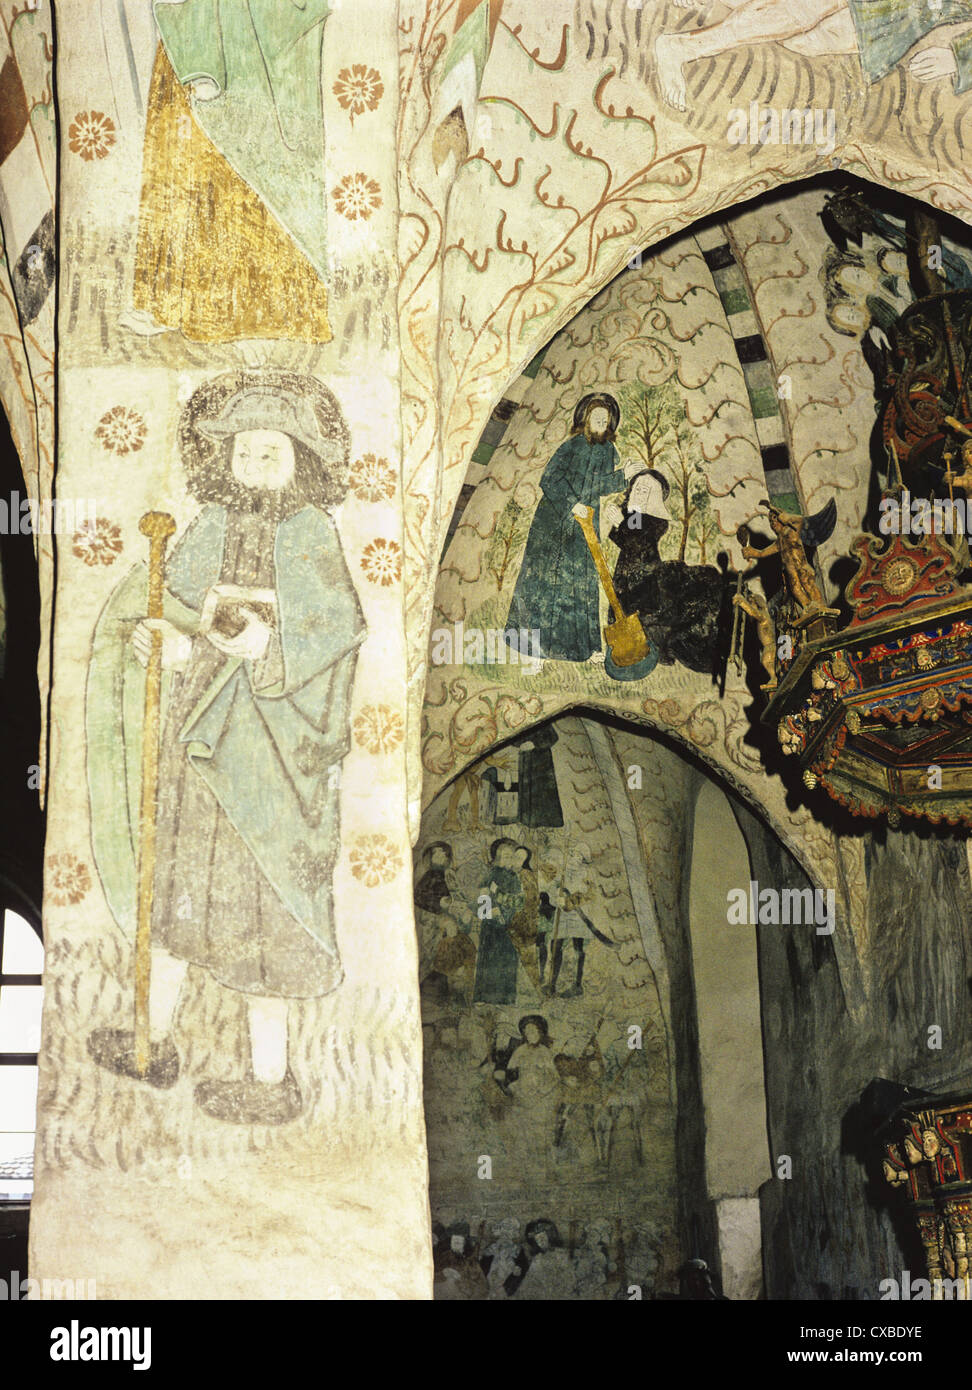 Wall murals in the 14th century Church of the Holy Cross, Hattula, Finland Stock Photo